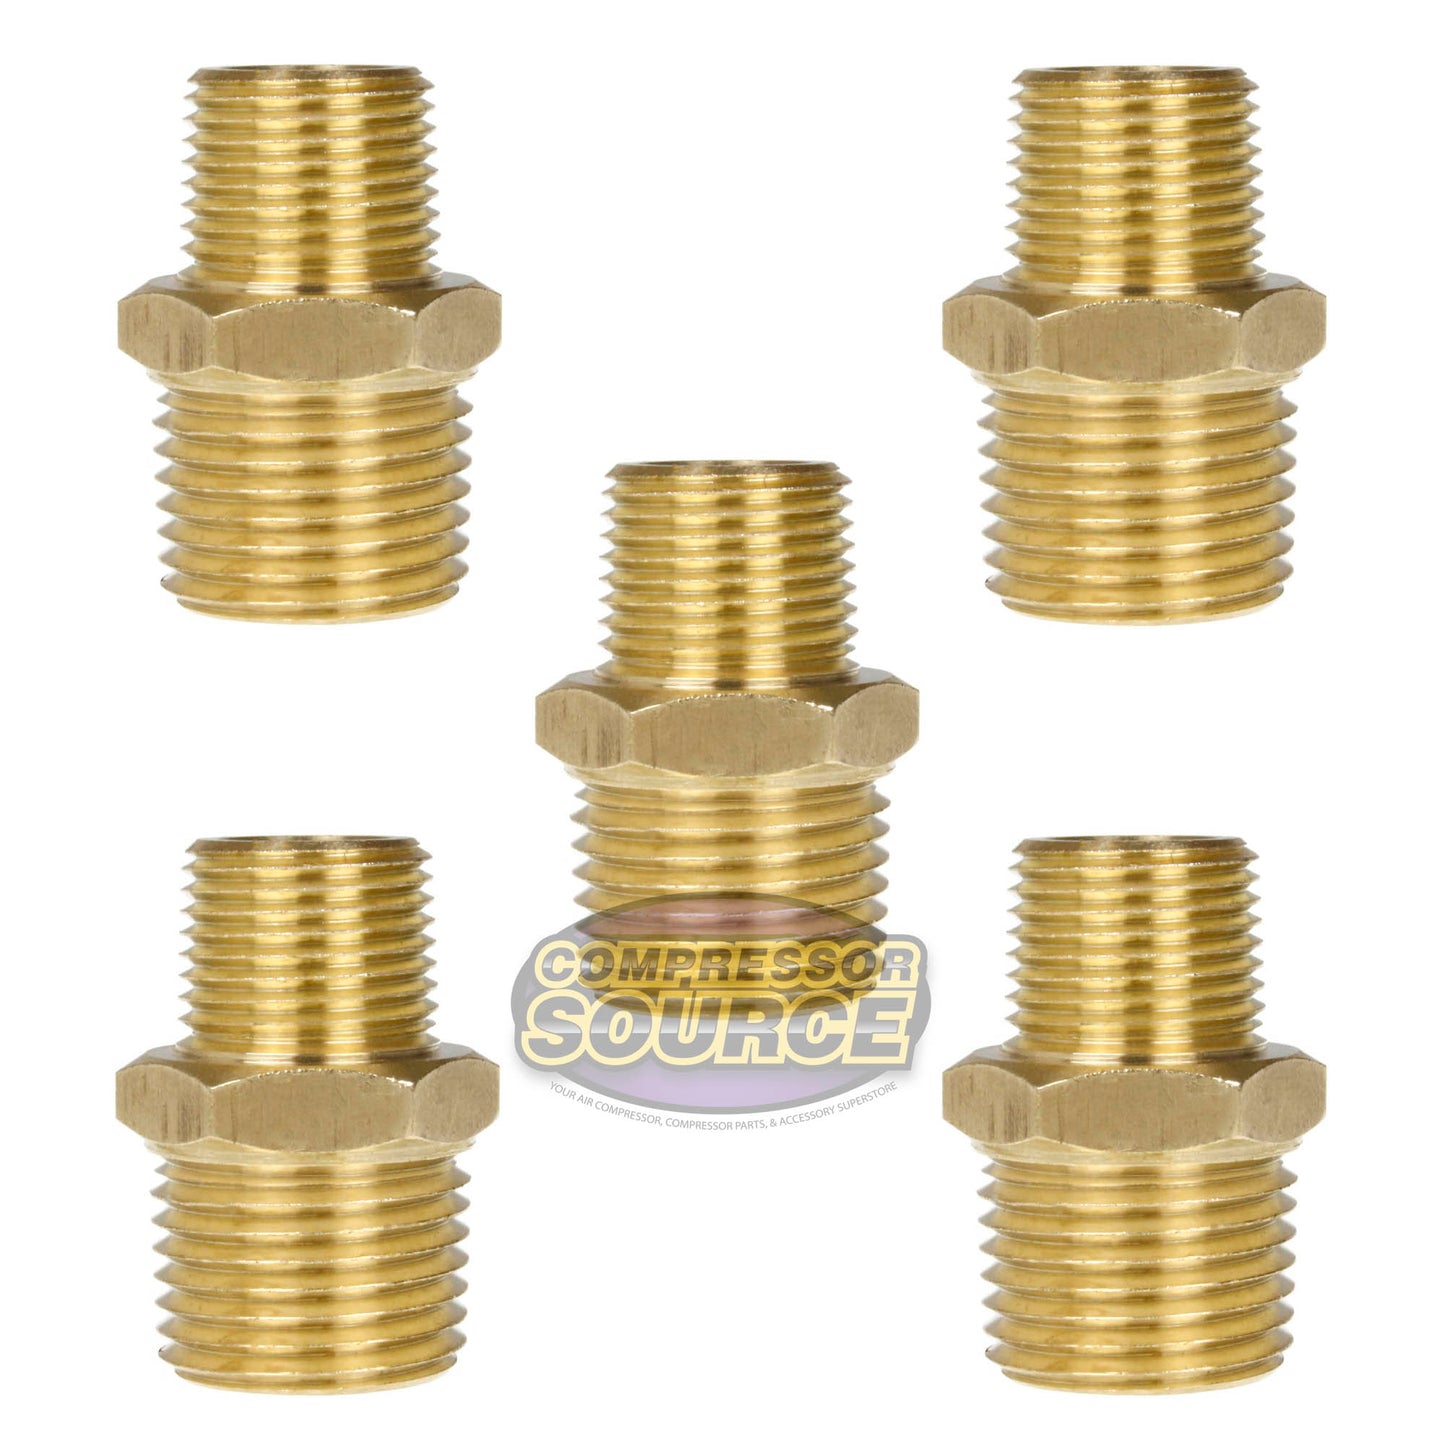 5 Pack 1/2" x 3/8" Male NPTF Pipe Reducing Hex Nipple Solid Brass Pipe Fitting